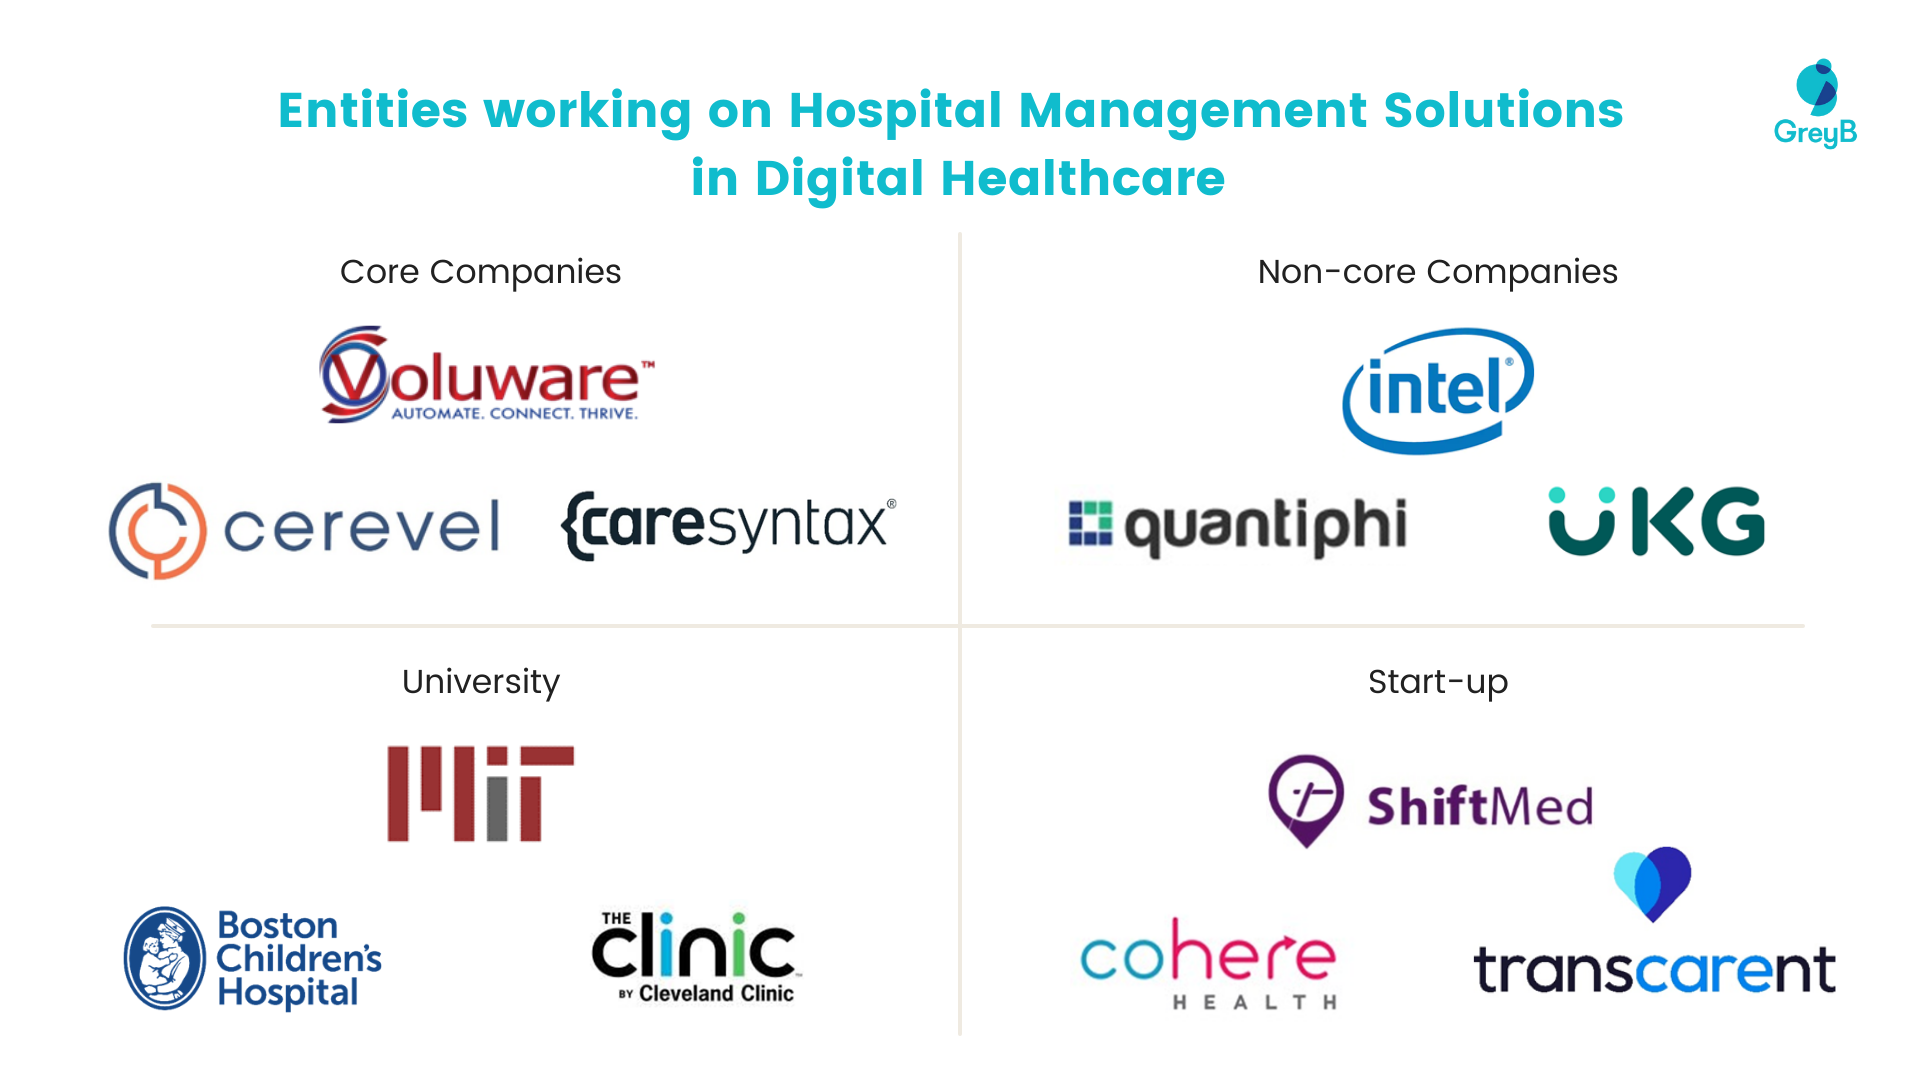 Entities working on Hospital Management Solutions in Digital Healthcare